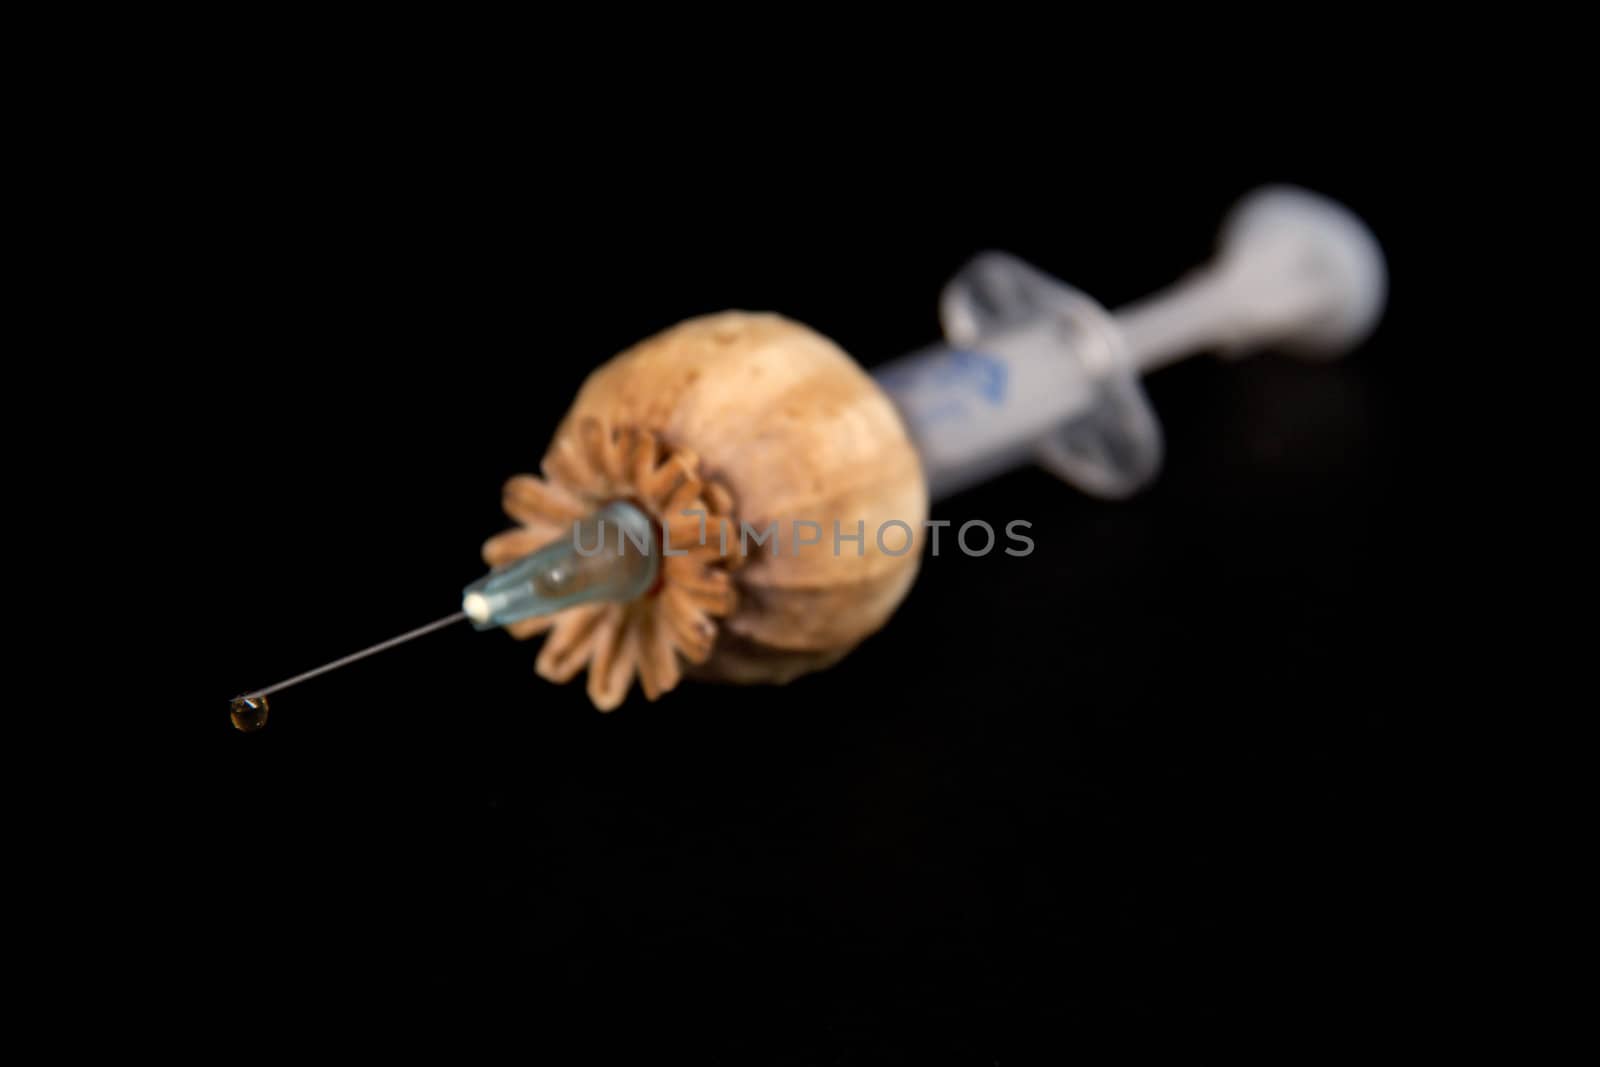 Syringe with an injection of the drug made of a poppy, on a black background.